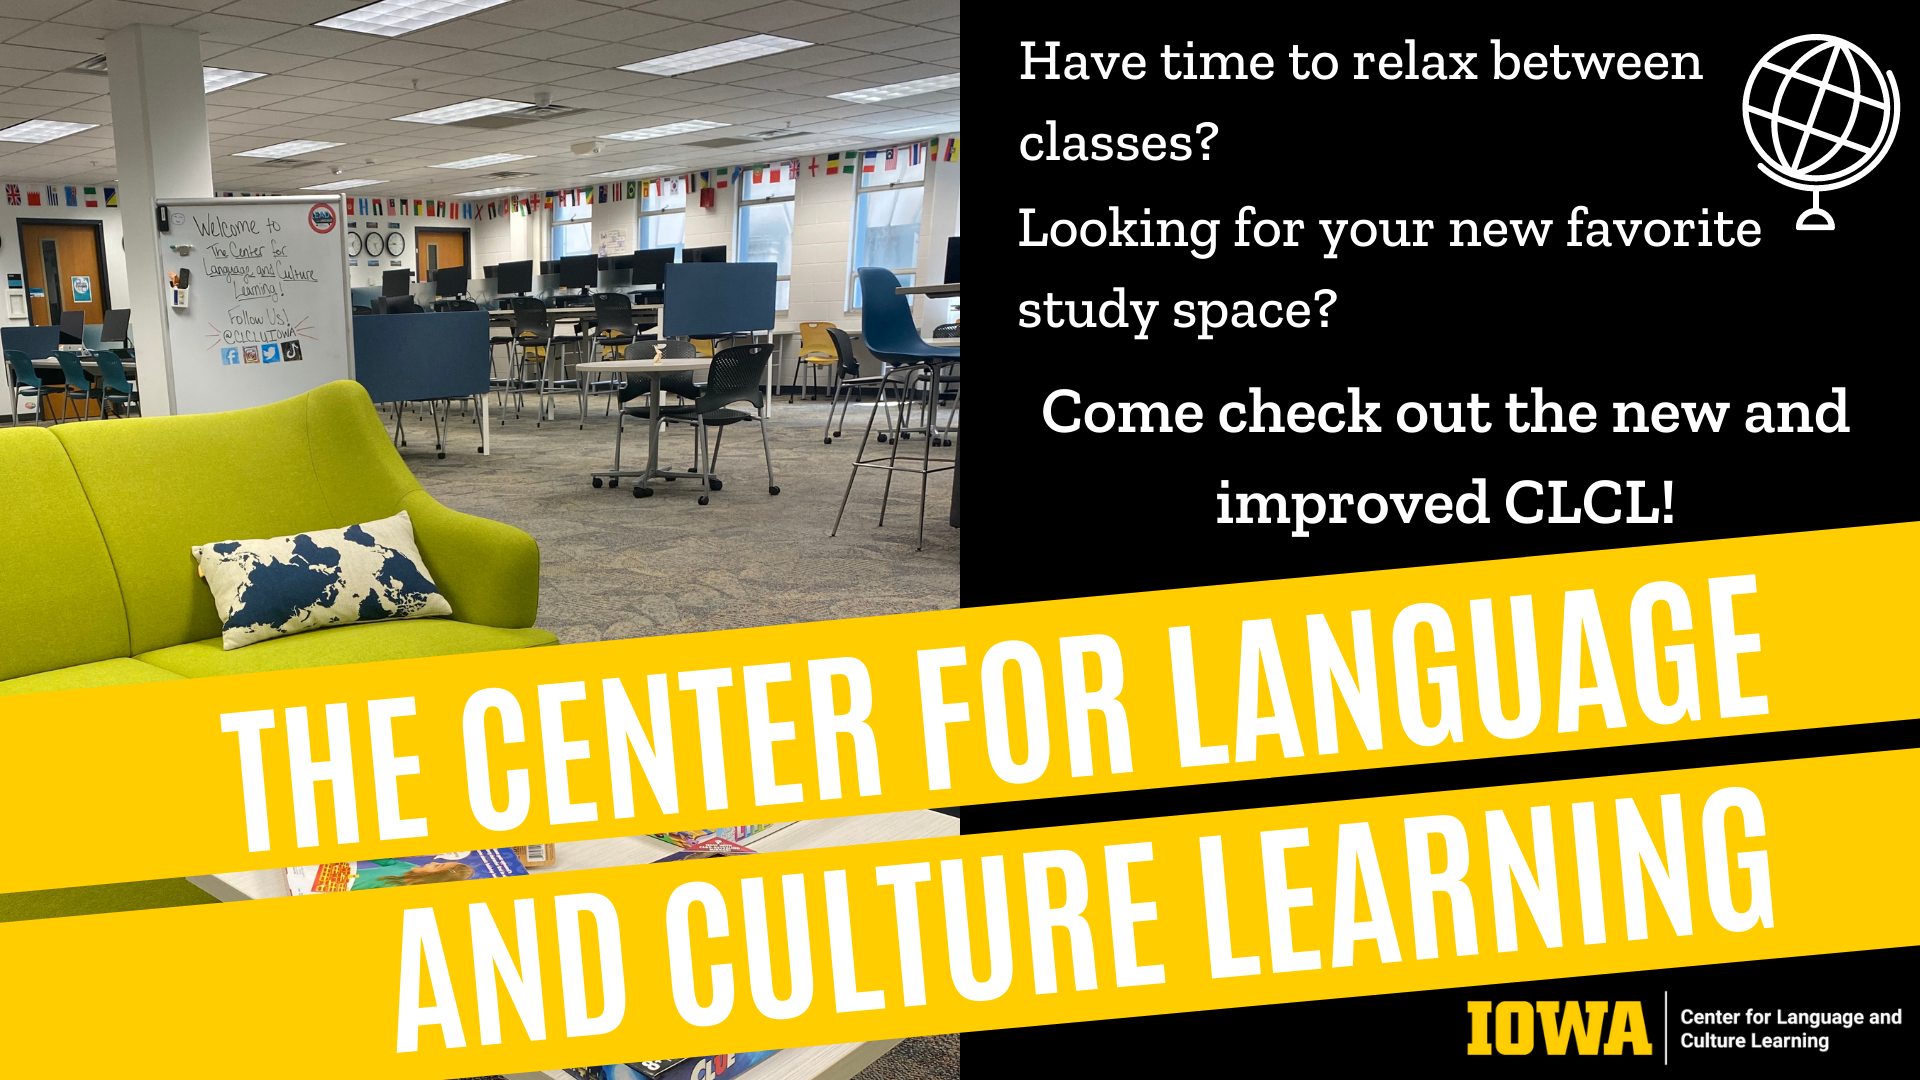 Have time in between classes? Looking for your new favorite study space? Come check out the new and improved CLCL! The Center for Language and Culture Learning